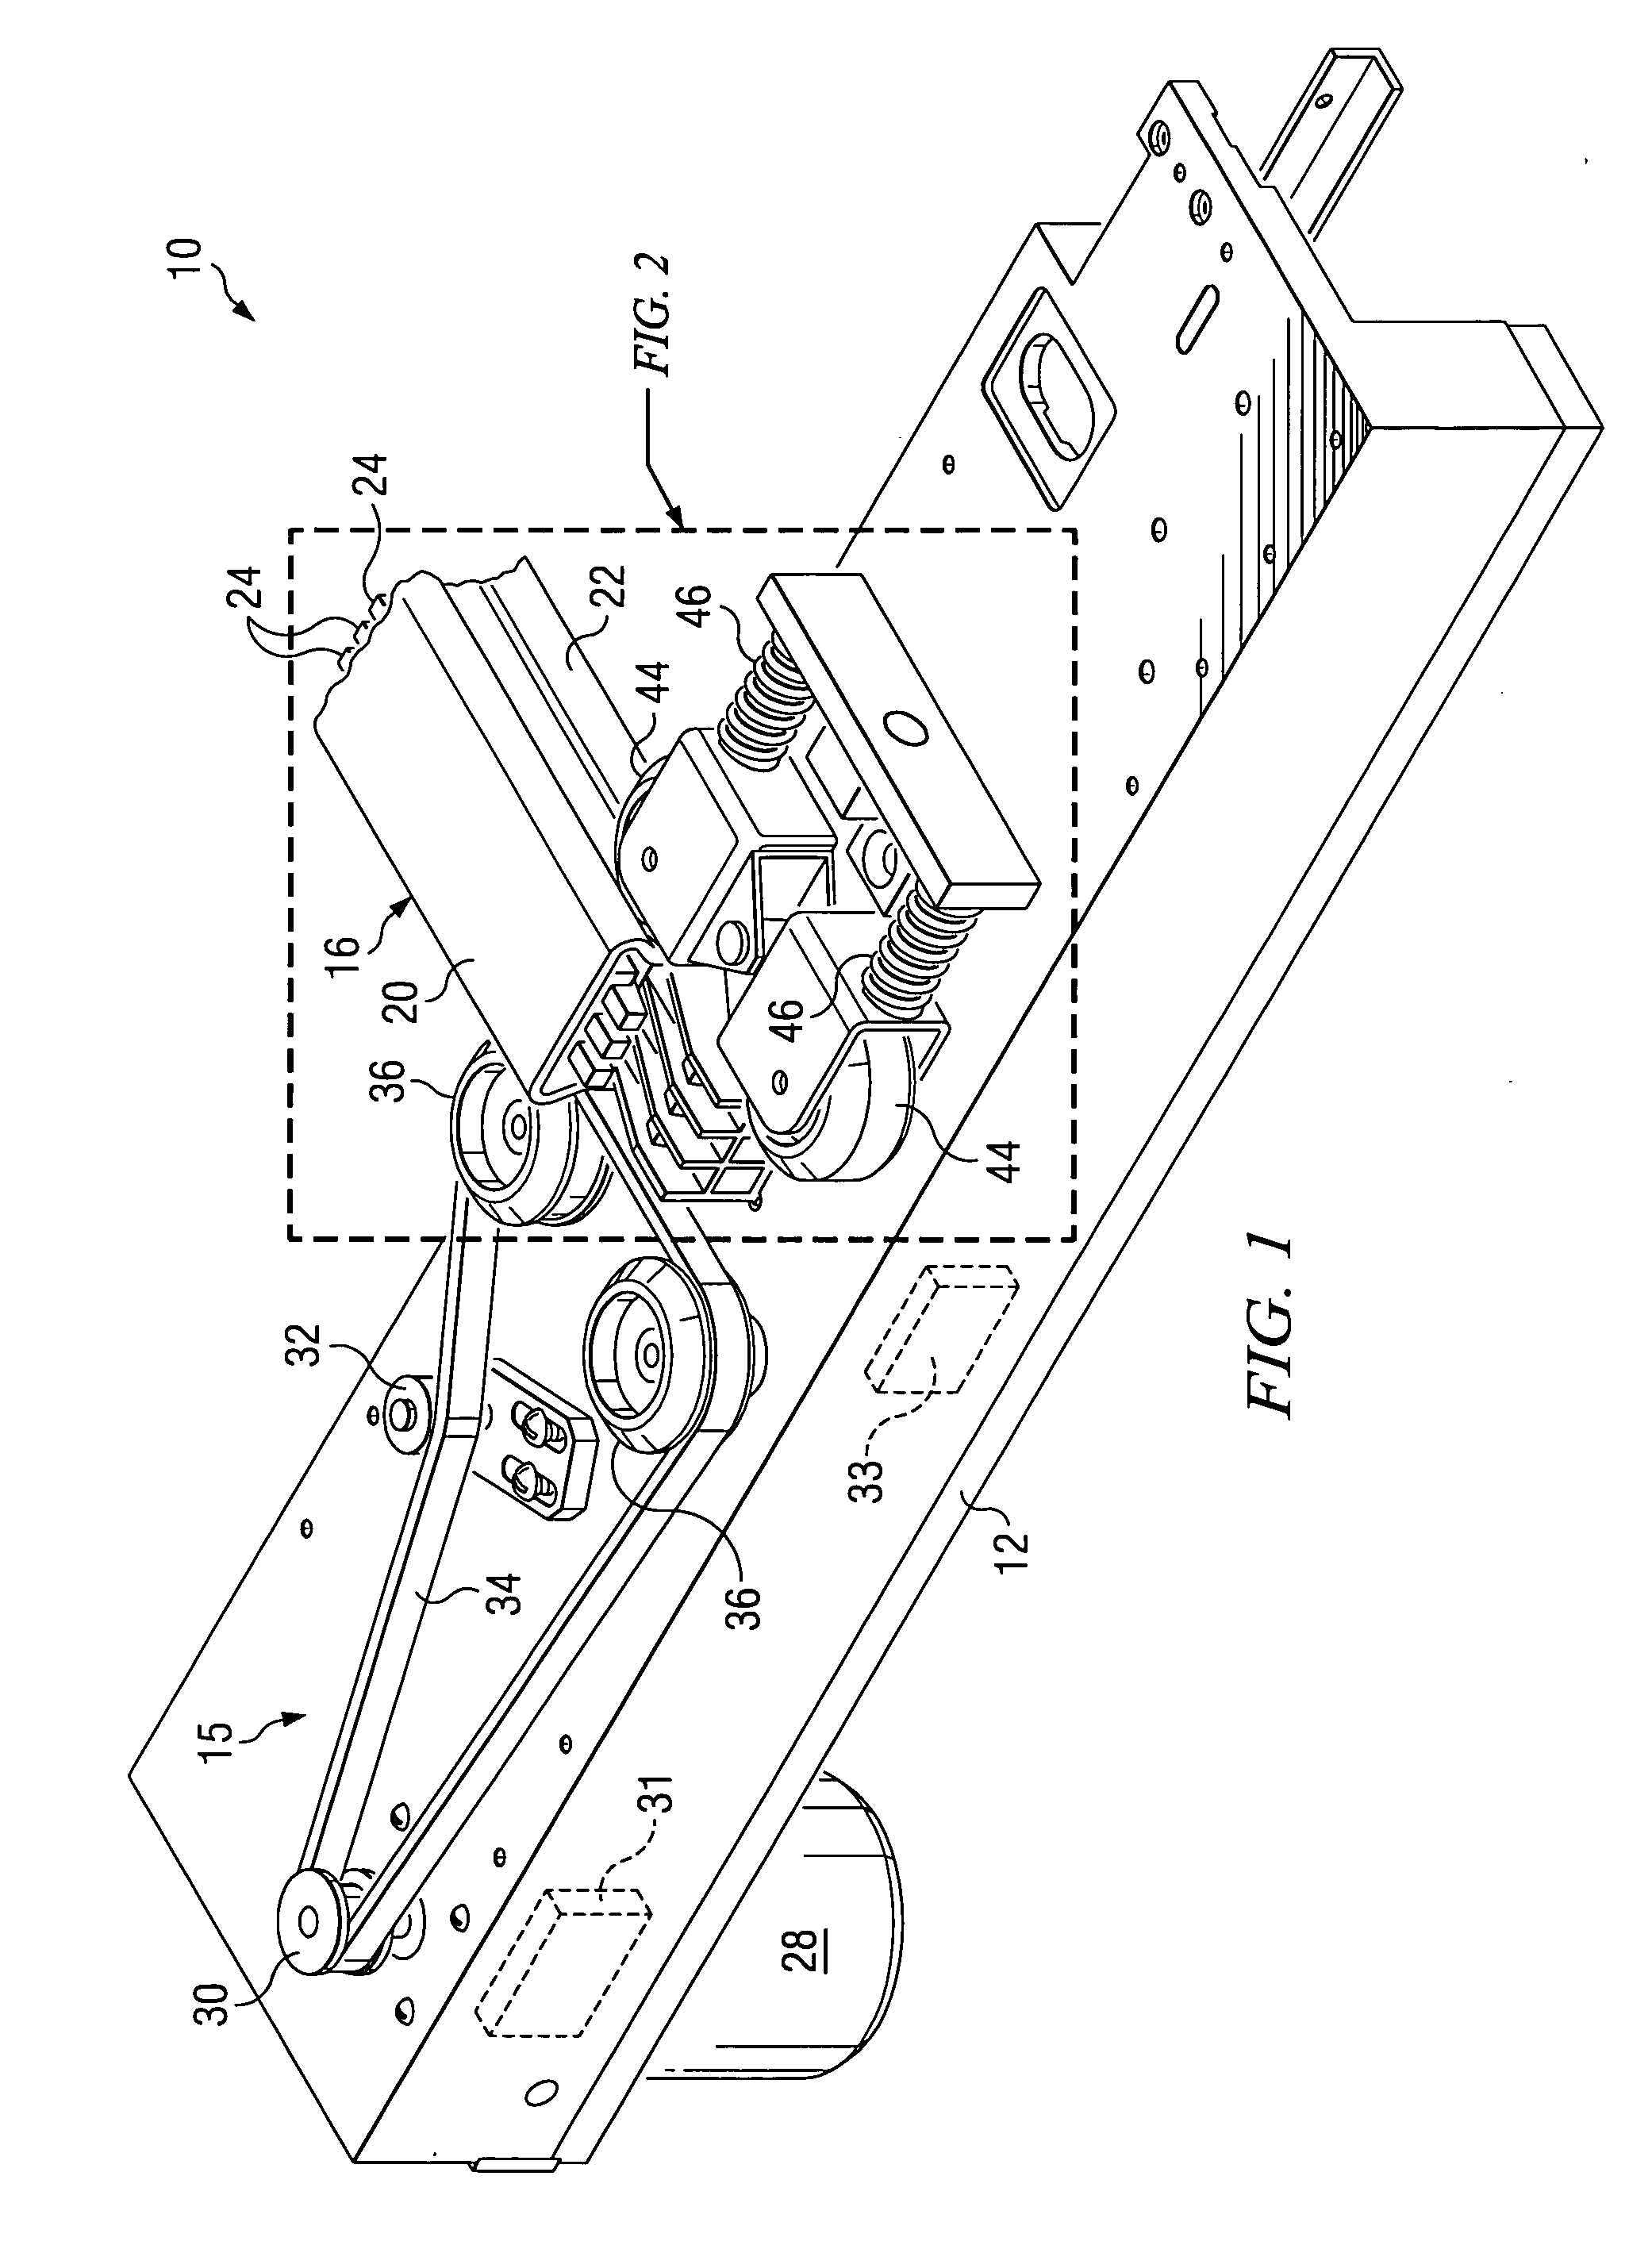 System and apparatus for driving a track mounted robot